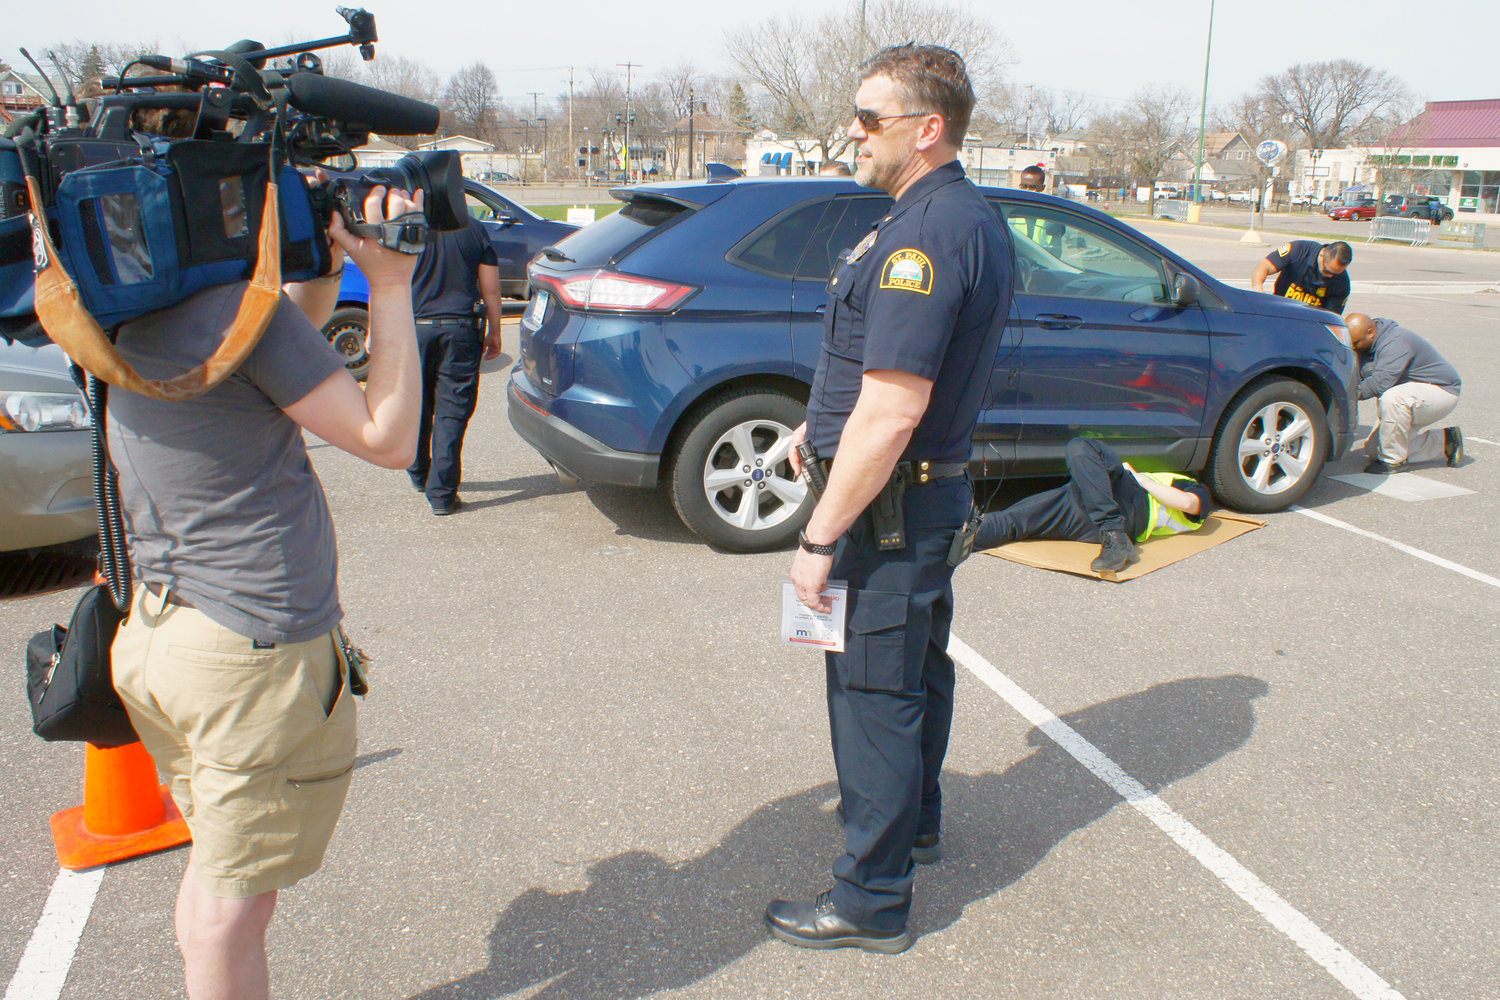 Sr. Commander Hallstrom explains the operation to a news crew while a “pit crew” paints a converter and installs anti-theft license plate screws.